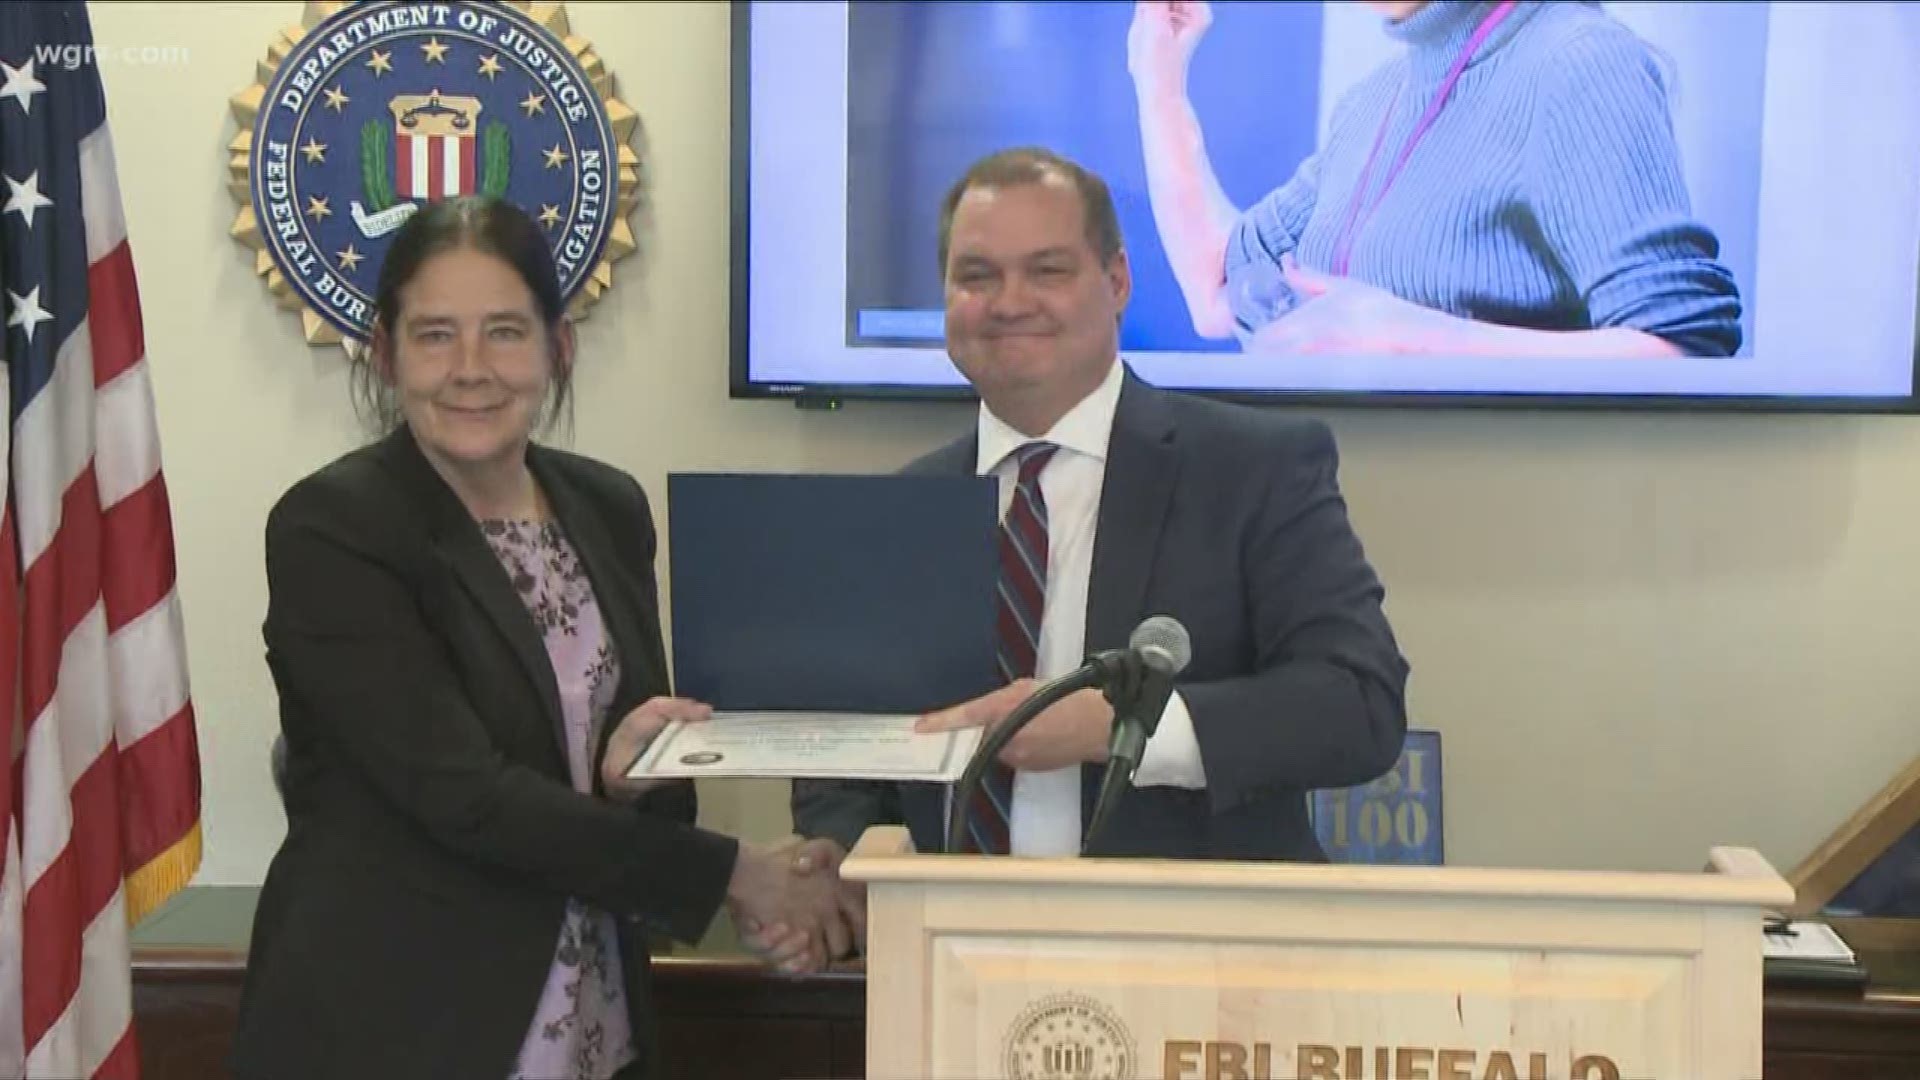 Cheryll Moore was awarded the FBI's 2019 Director's Community Leadership Award.
She works as the medical care administrator and director of the health opioid program